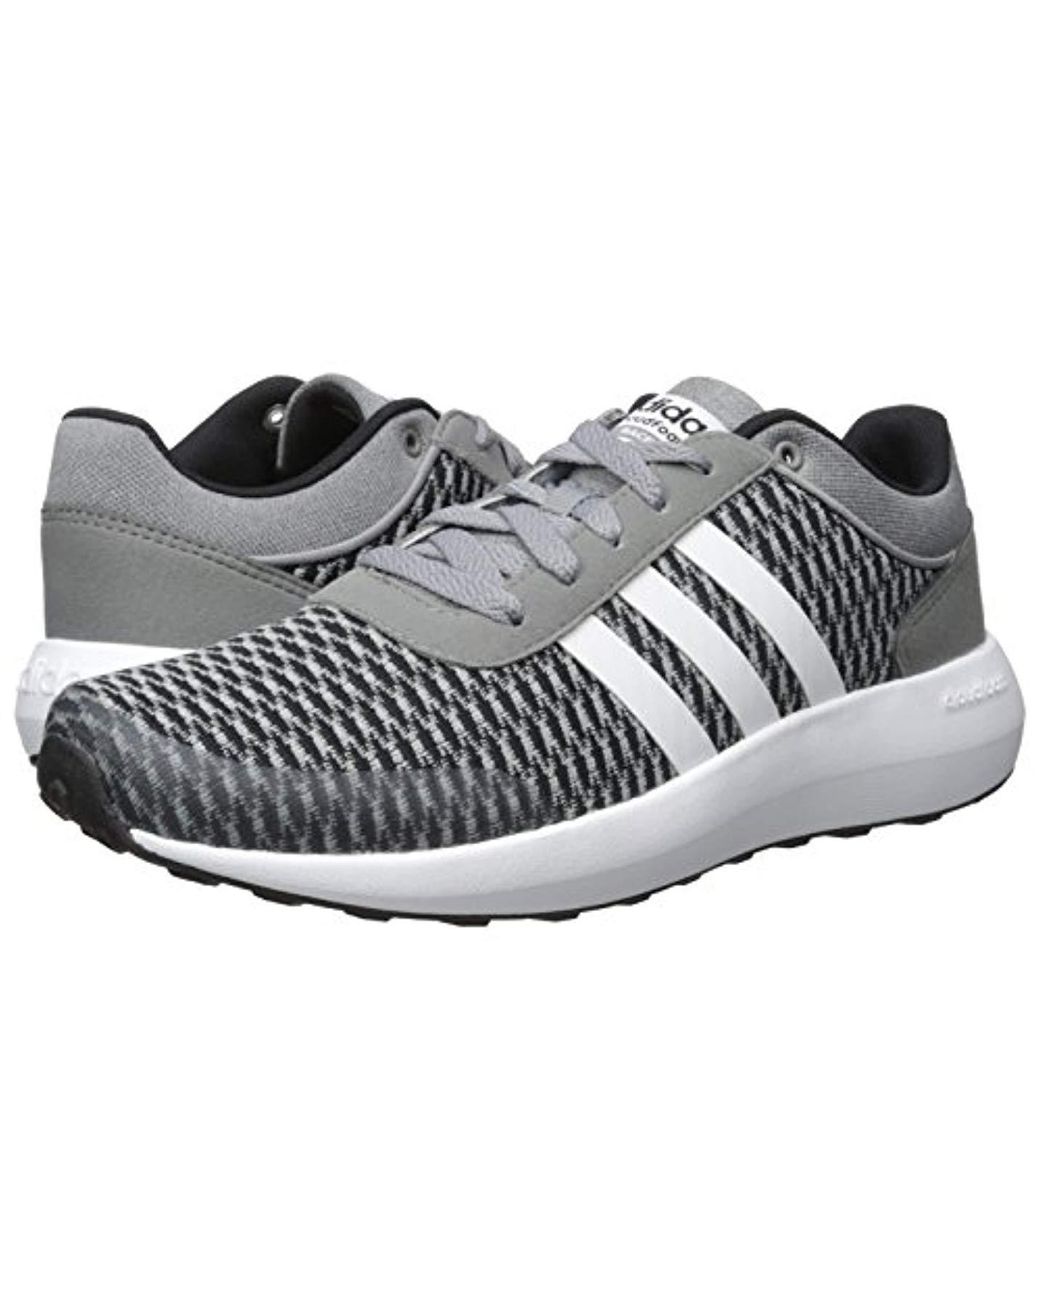 adidas Synthetic Neo Cloudfoam Race Running Shoe in Black/White/Grey (Grey)  for Men | Lyst UK